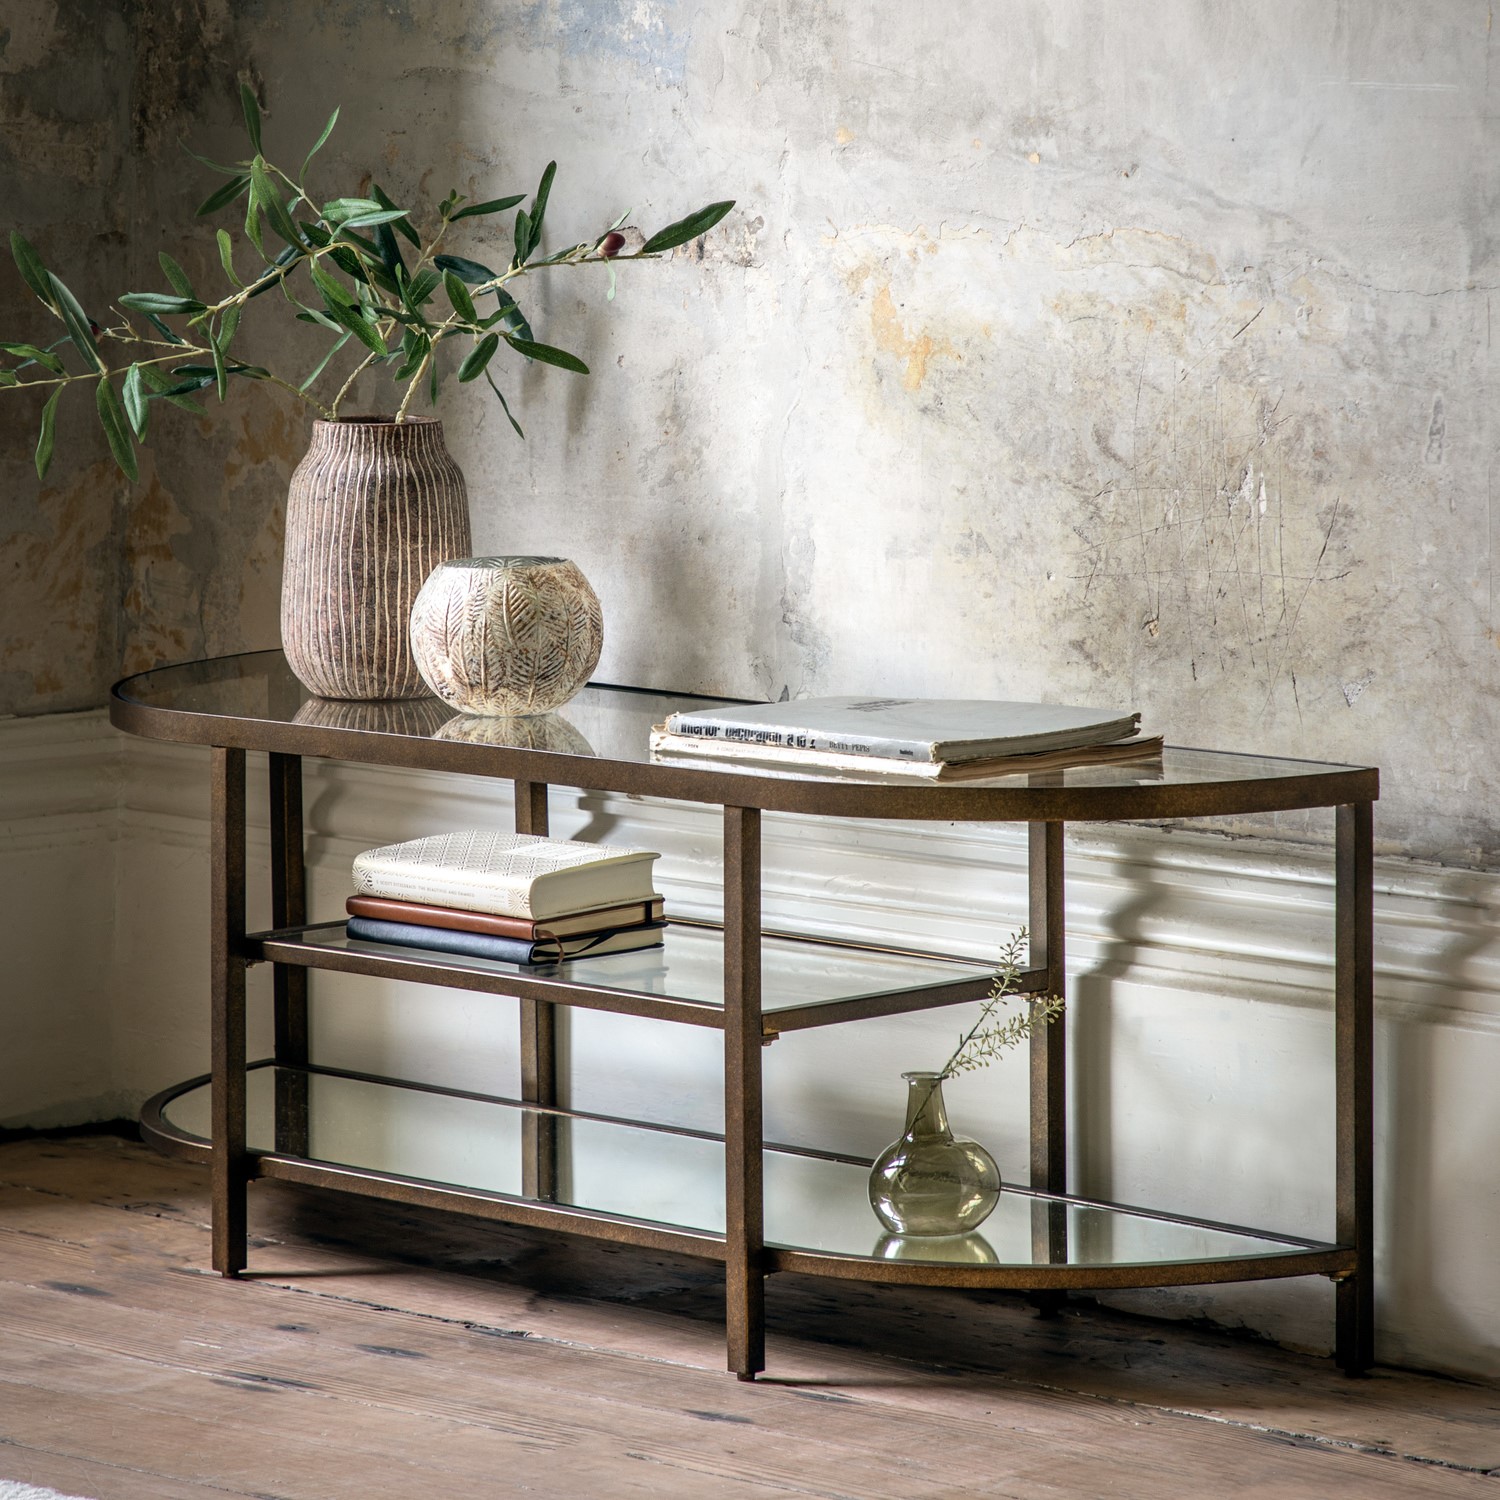 Read more about Hudson glass tv stand in bronze caspian house